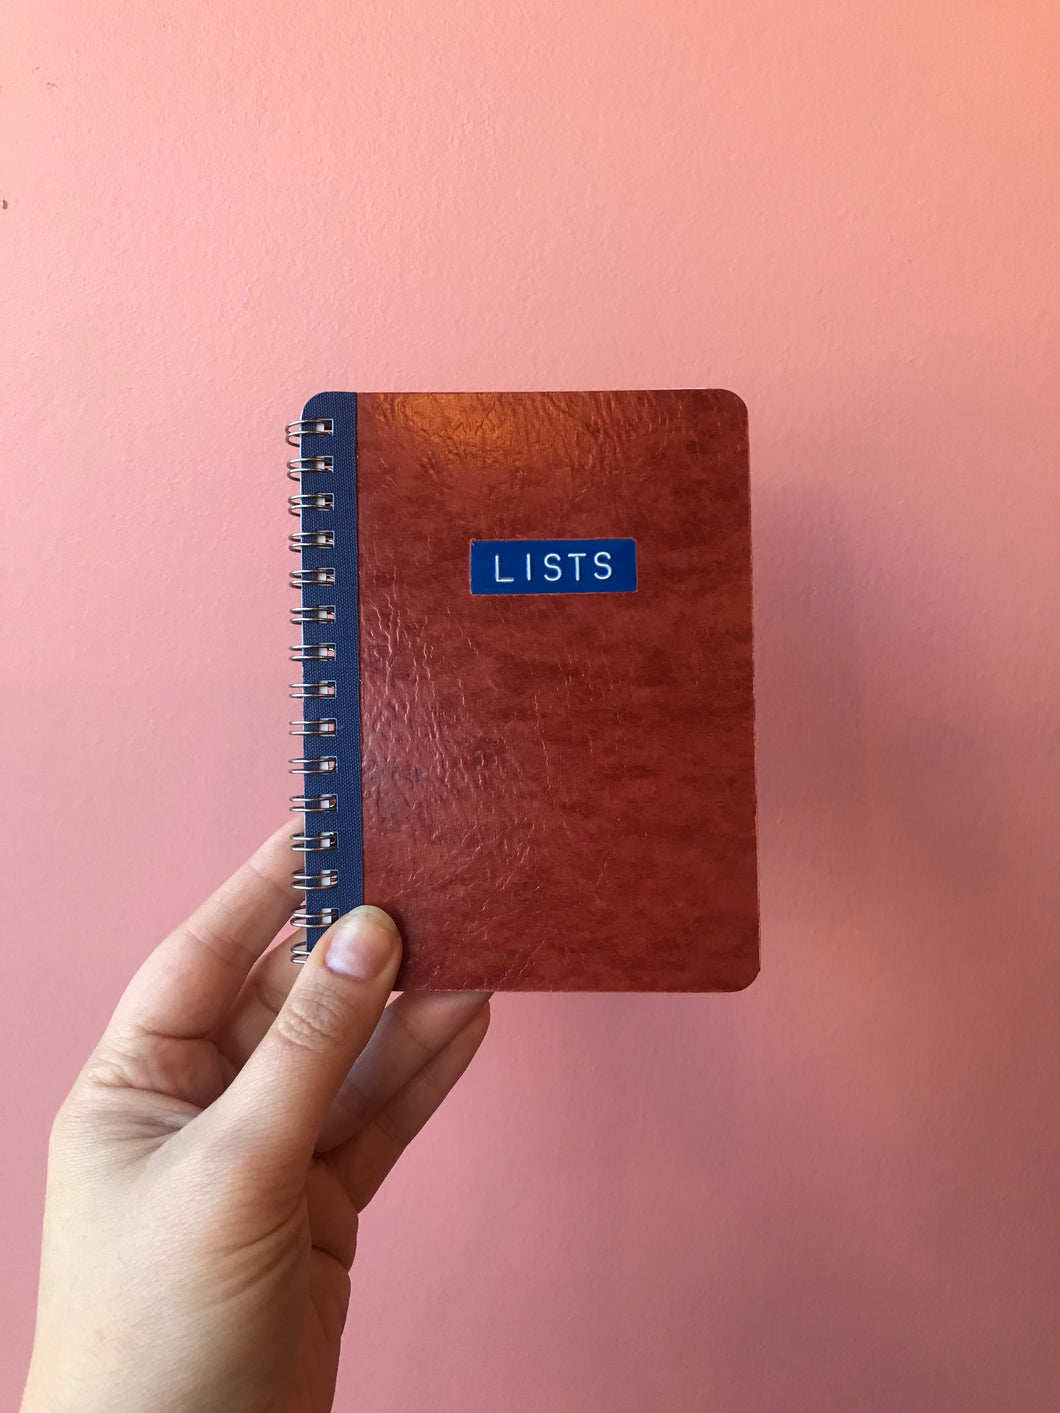 LISTS - handmade rescued notebook